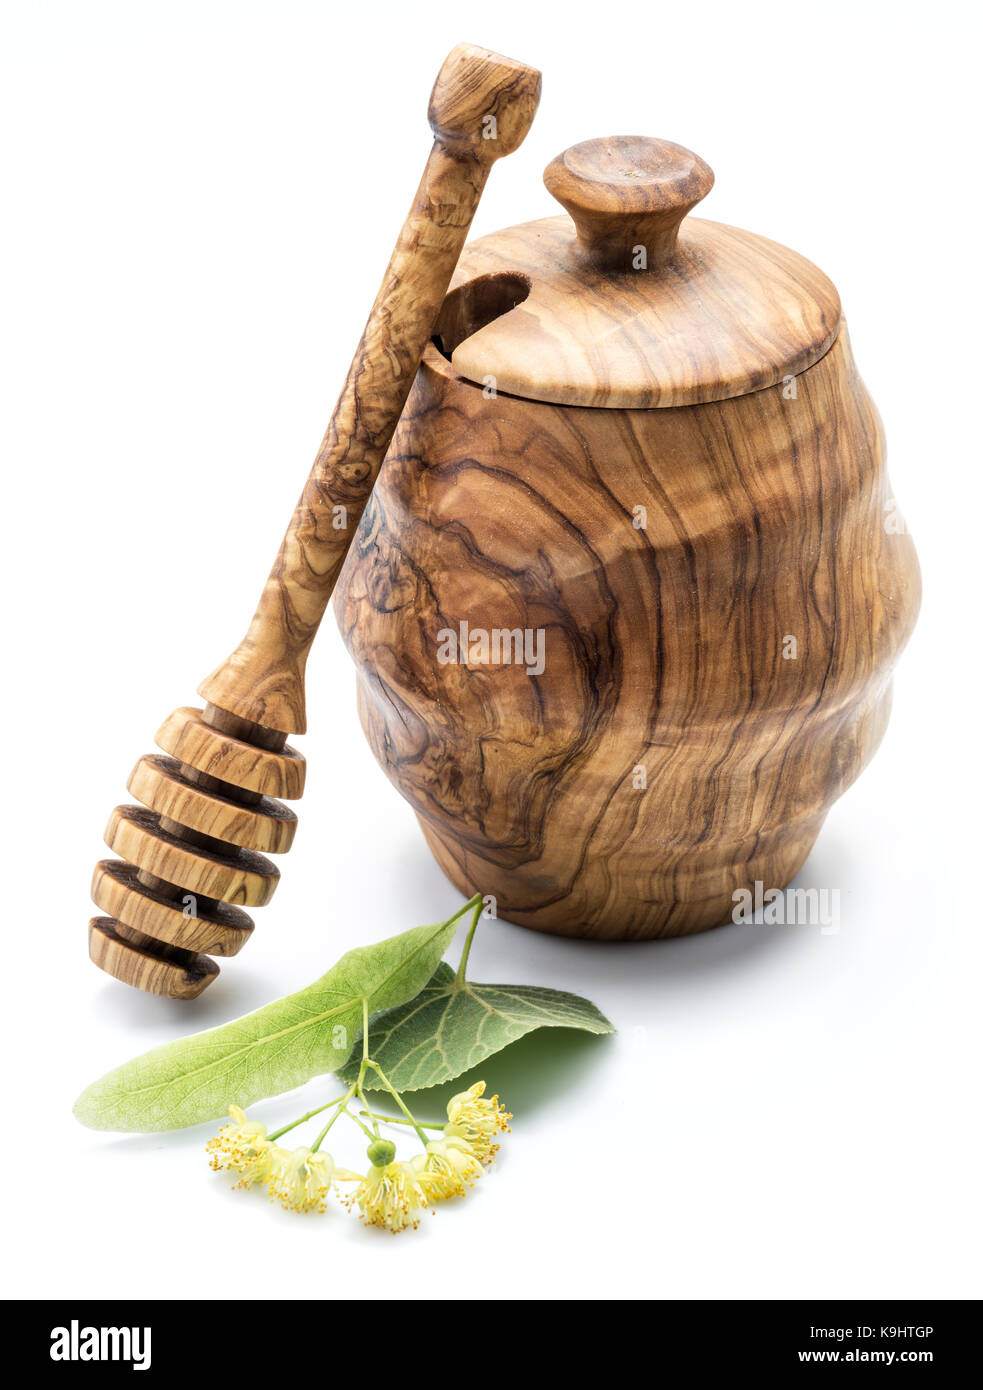 Wooden pot full of fresh linden honey and linden flowers. Stock Photo